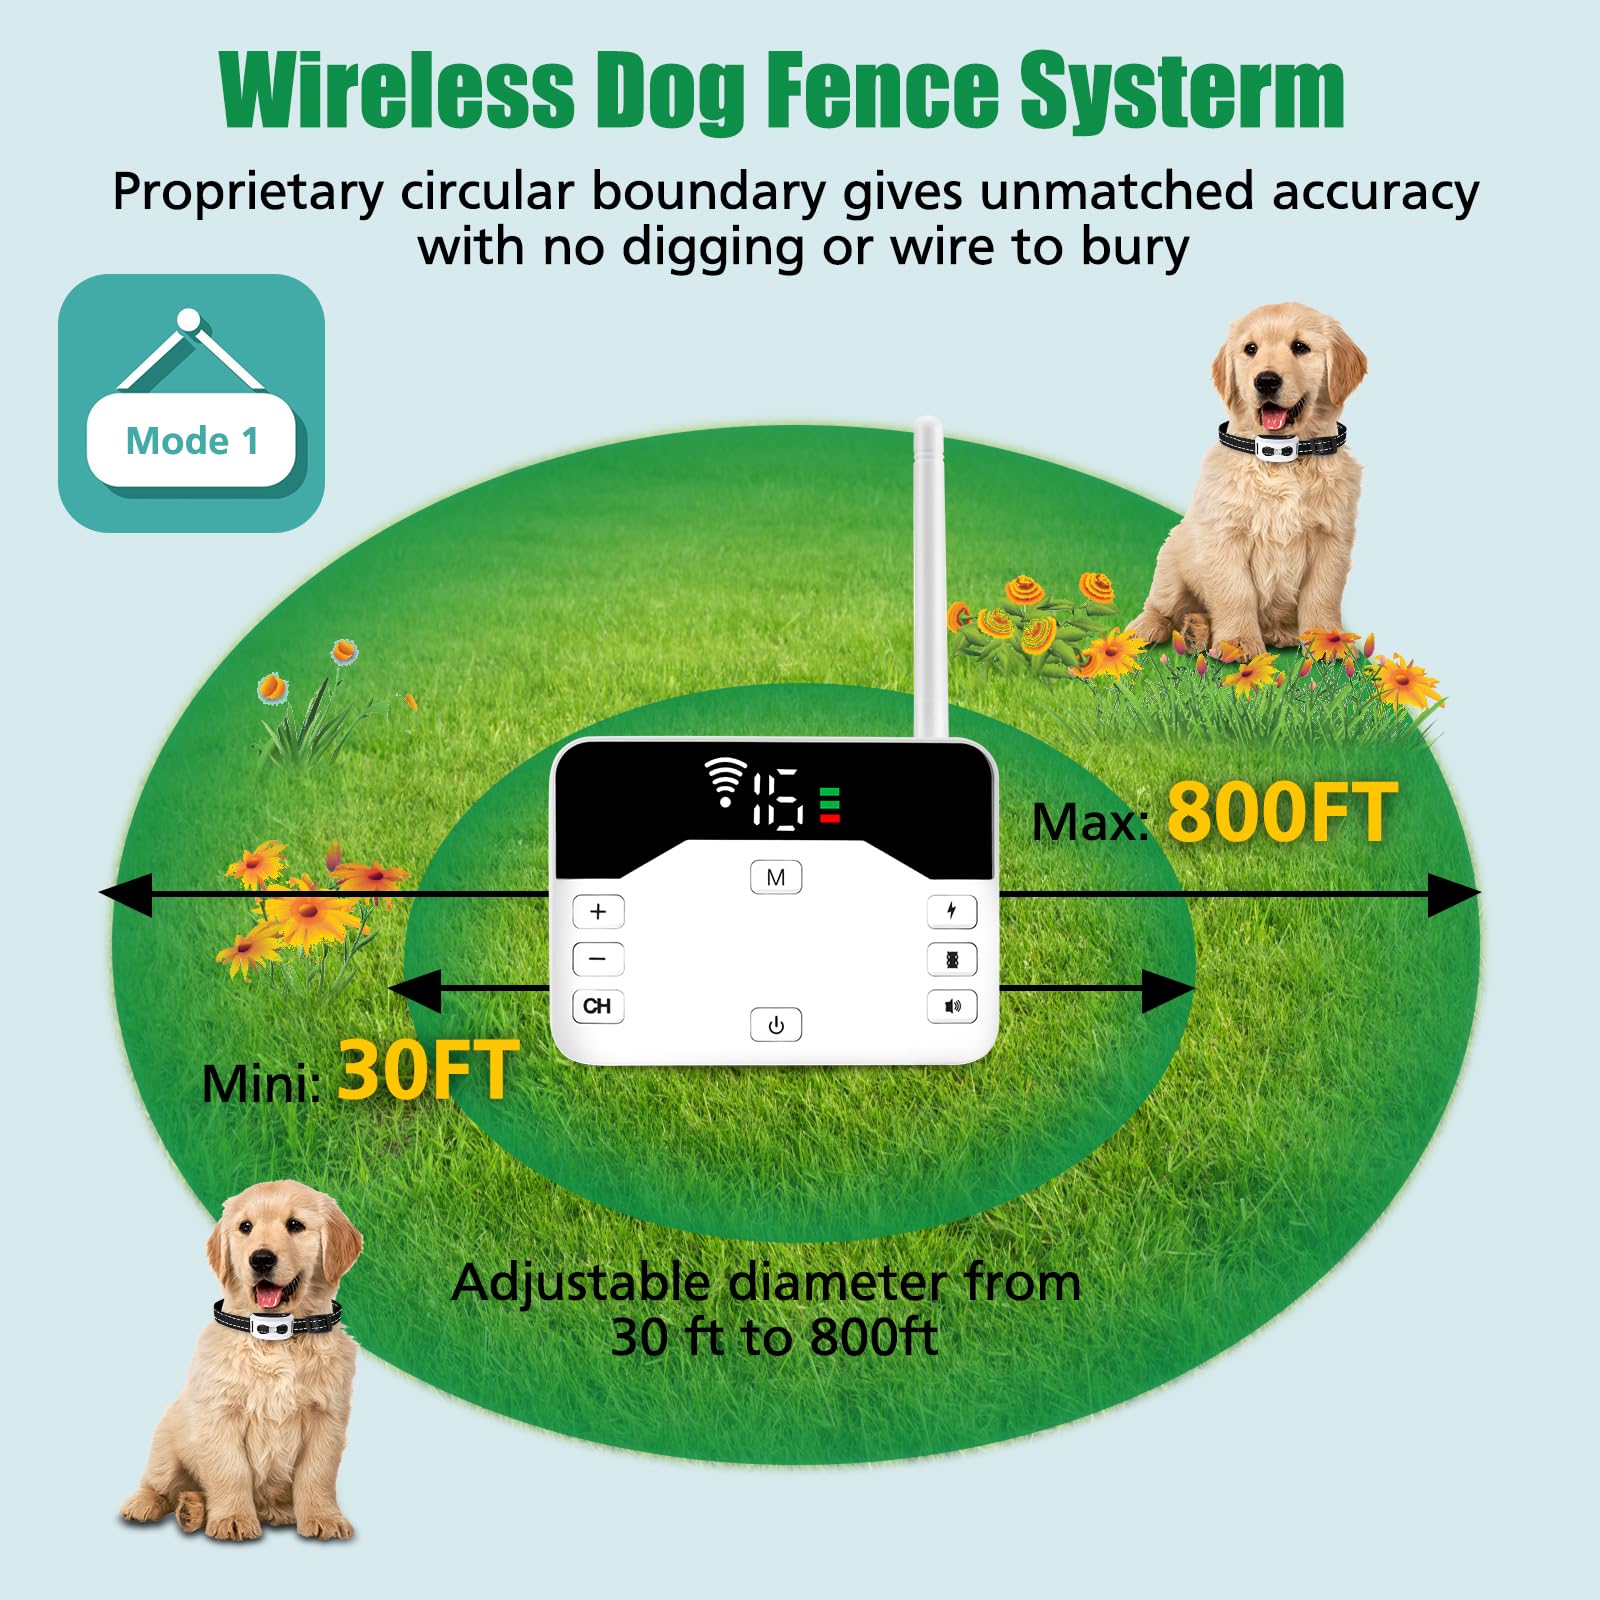 Paourify Wireless Dog Fence, 2-in-1 Electric Dog Fence System for 2 Dogs & Remote Training Shock Collar, Cover Up to 8 Acre(30-800ft) Portable Pets Containment System for Outdoor,Yard,Camping